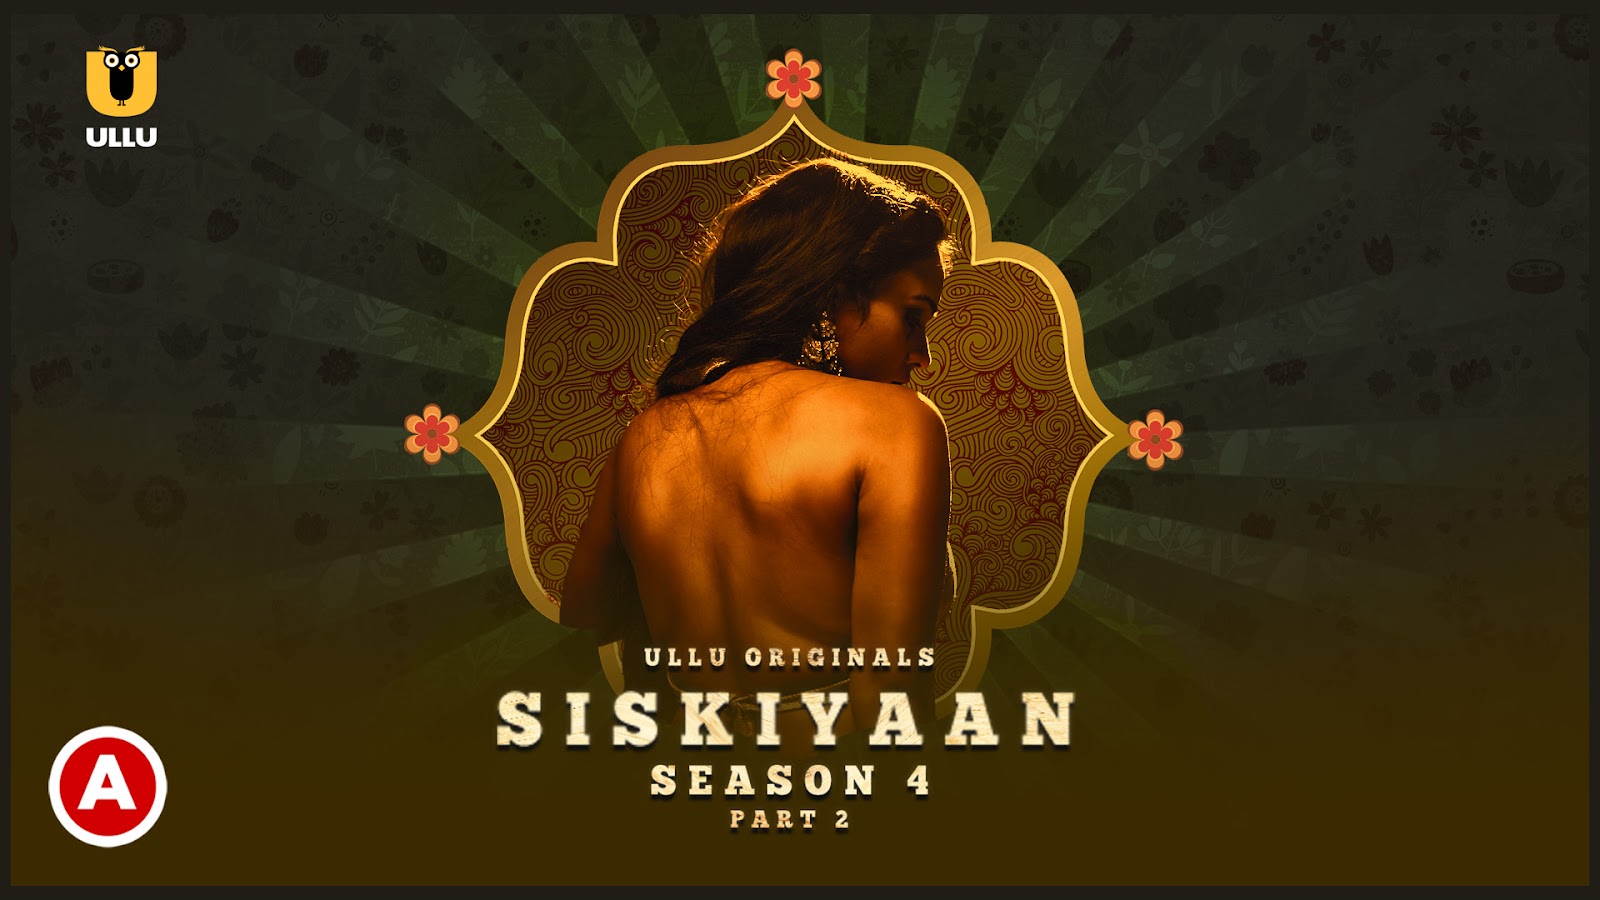 Exciting News for Palang Tod Web Series Fans: Siskiyaan Season 4 Part 2 Released on Ullu App